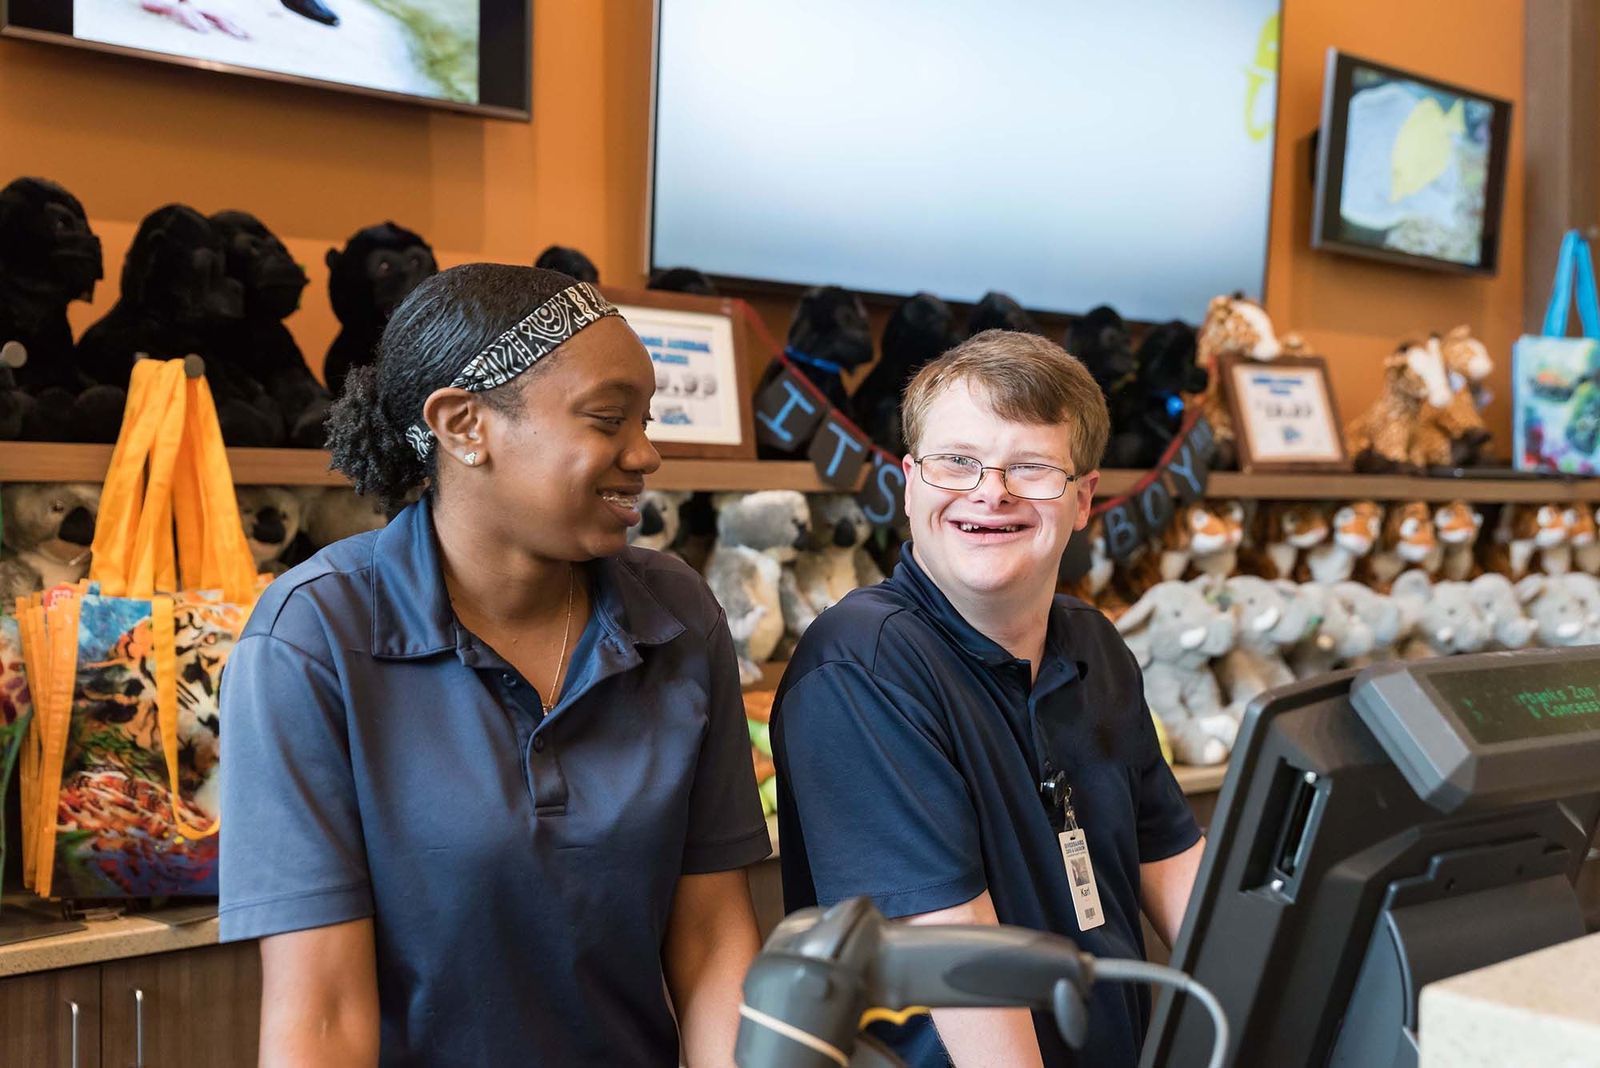 Hire Me SC is a campaign launched by Able SC and the S.C. Disability Employment Coalition to help employers integrate people with disabilities into their workforce. (Photo/Provided)